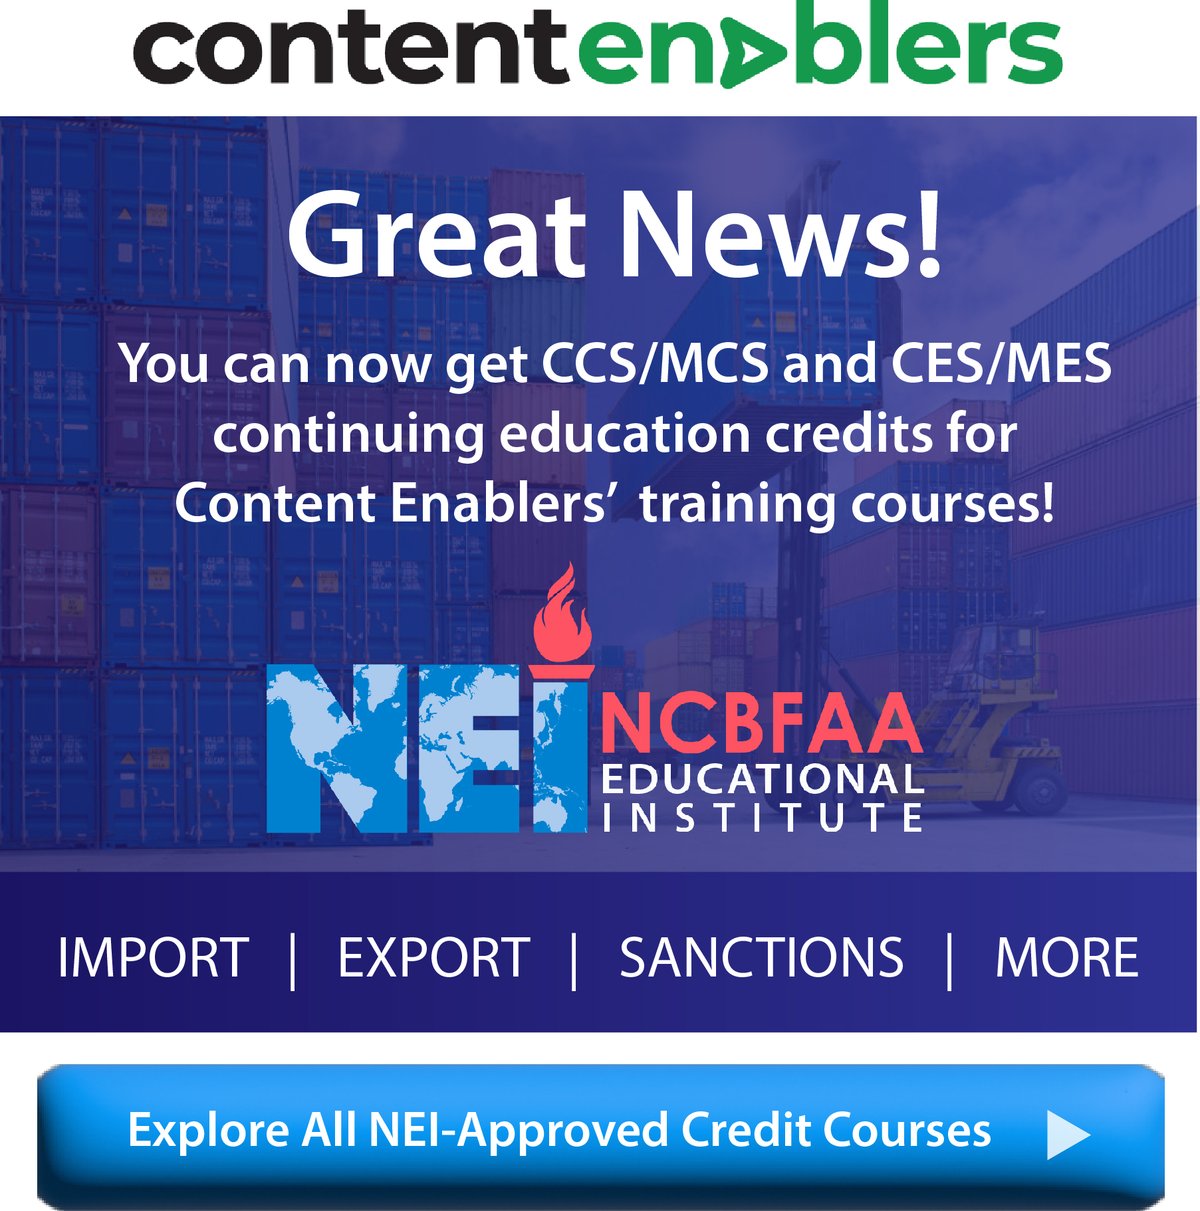 NEI Approved Courses